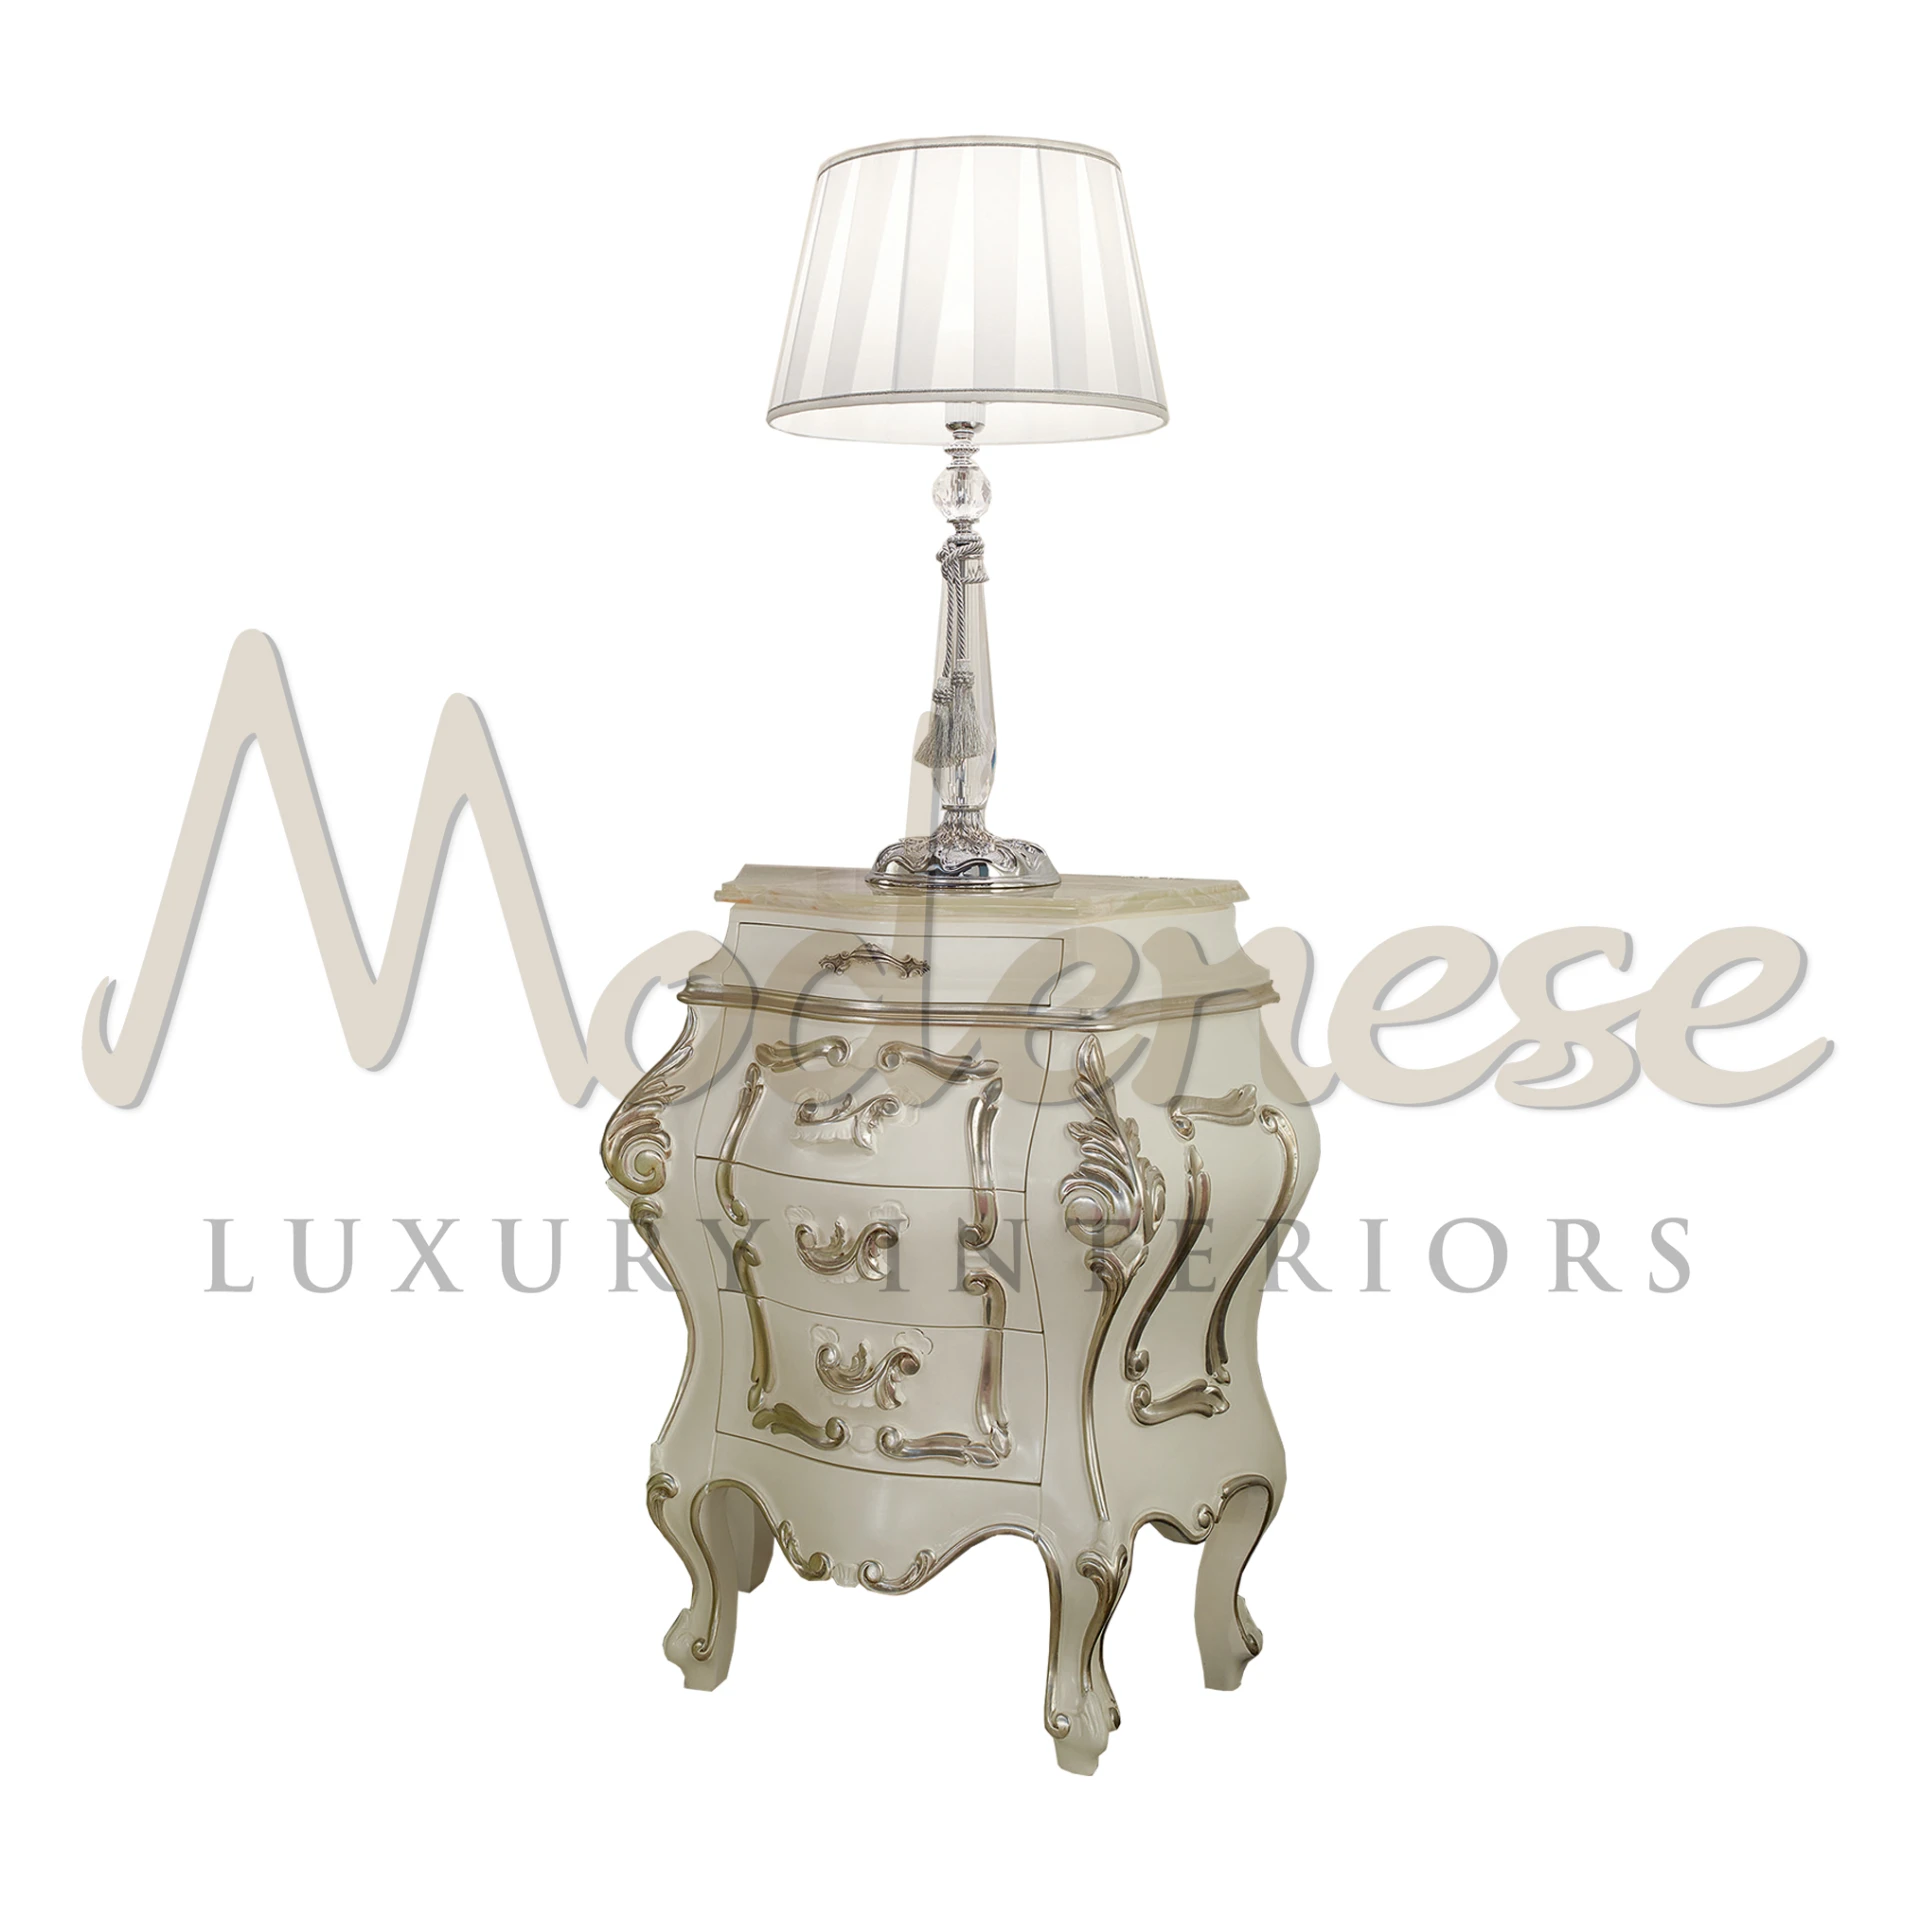 Opulent Modenese nightstand in a cream hue, showcasing baroque craftsmanship with detailed curves and a stylish silver table lamp, embodying Italian luxury.